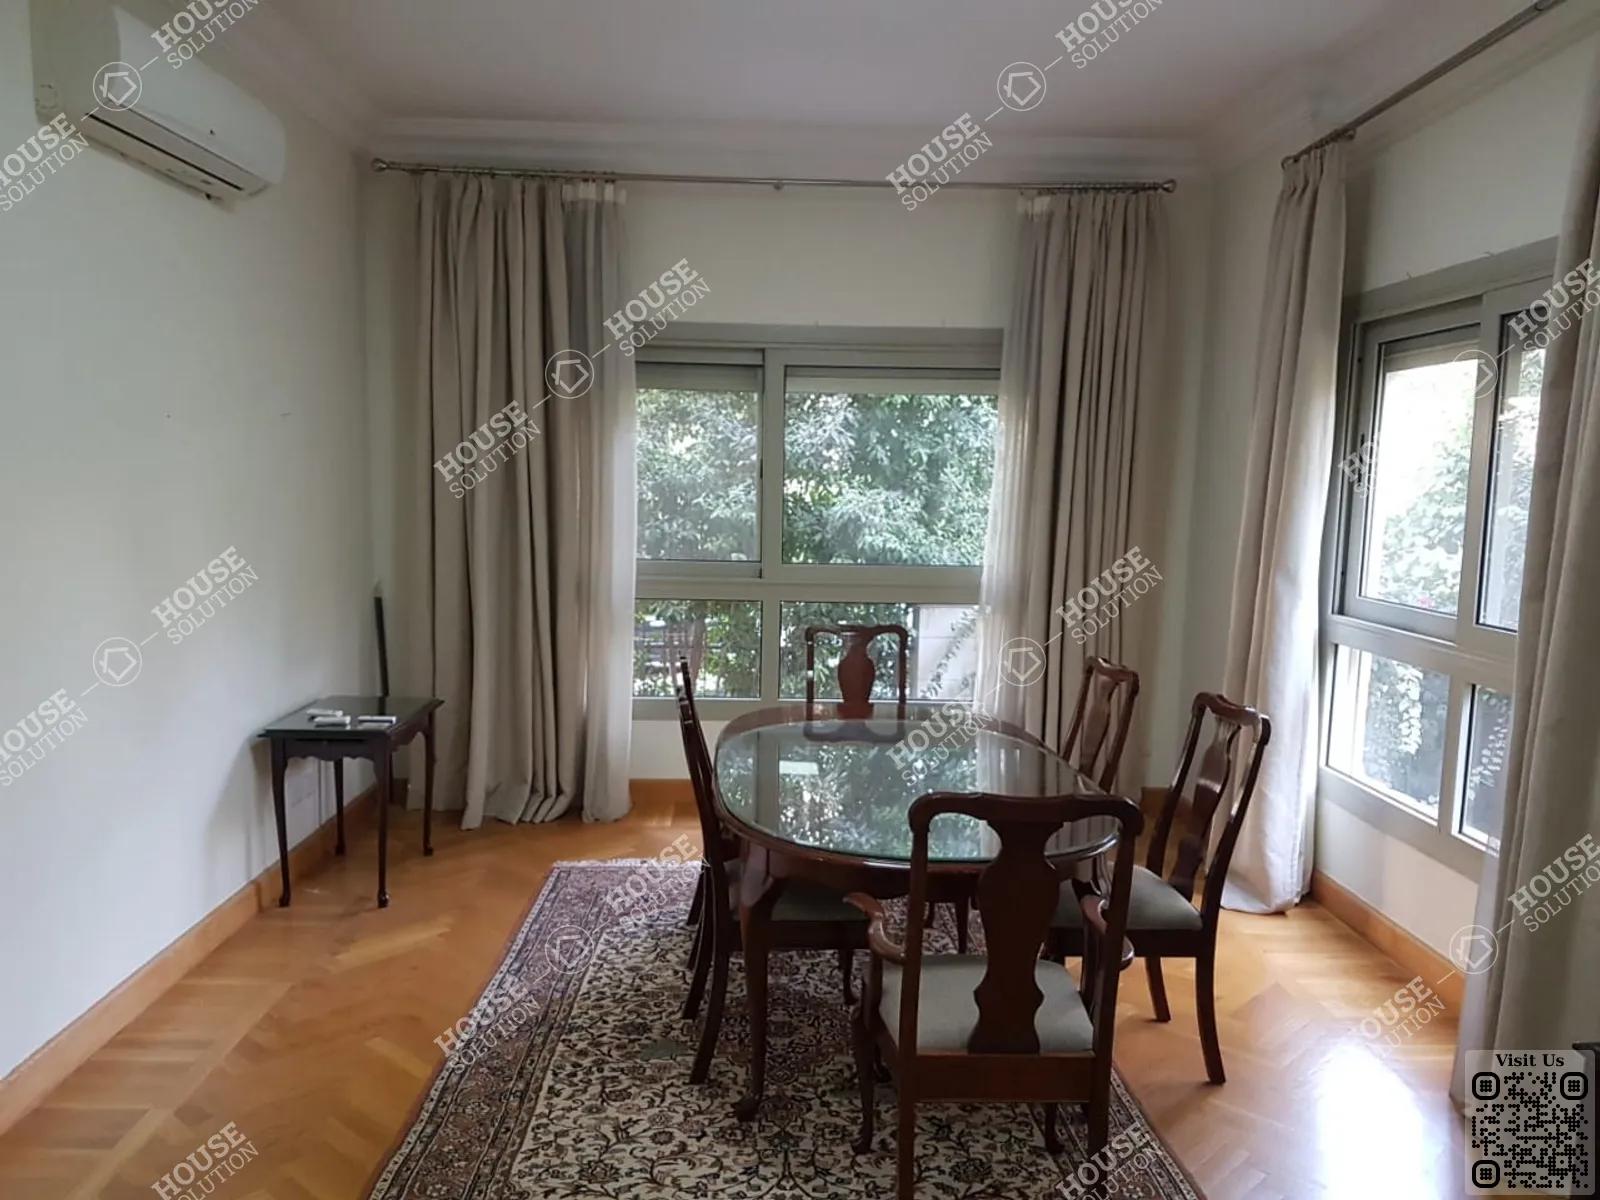 DINING AREA @ Apartments For Rent In Maadi Maadi Sarayat Area: 185 m² consists of 2 Bedrooms 2 Bathrooms Furnished 5 stars #4351-2